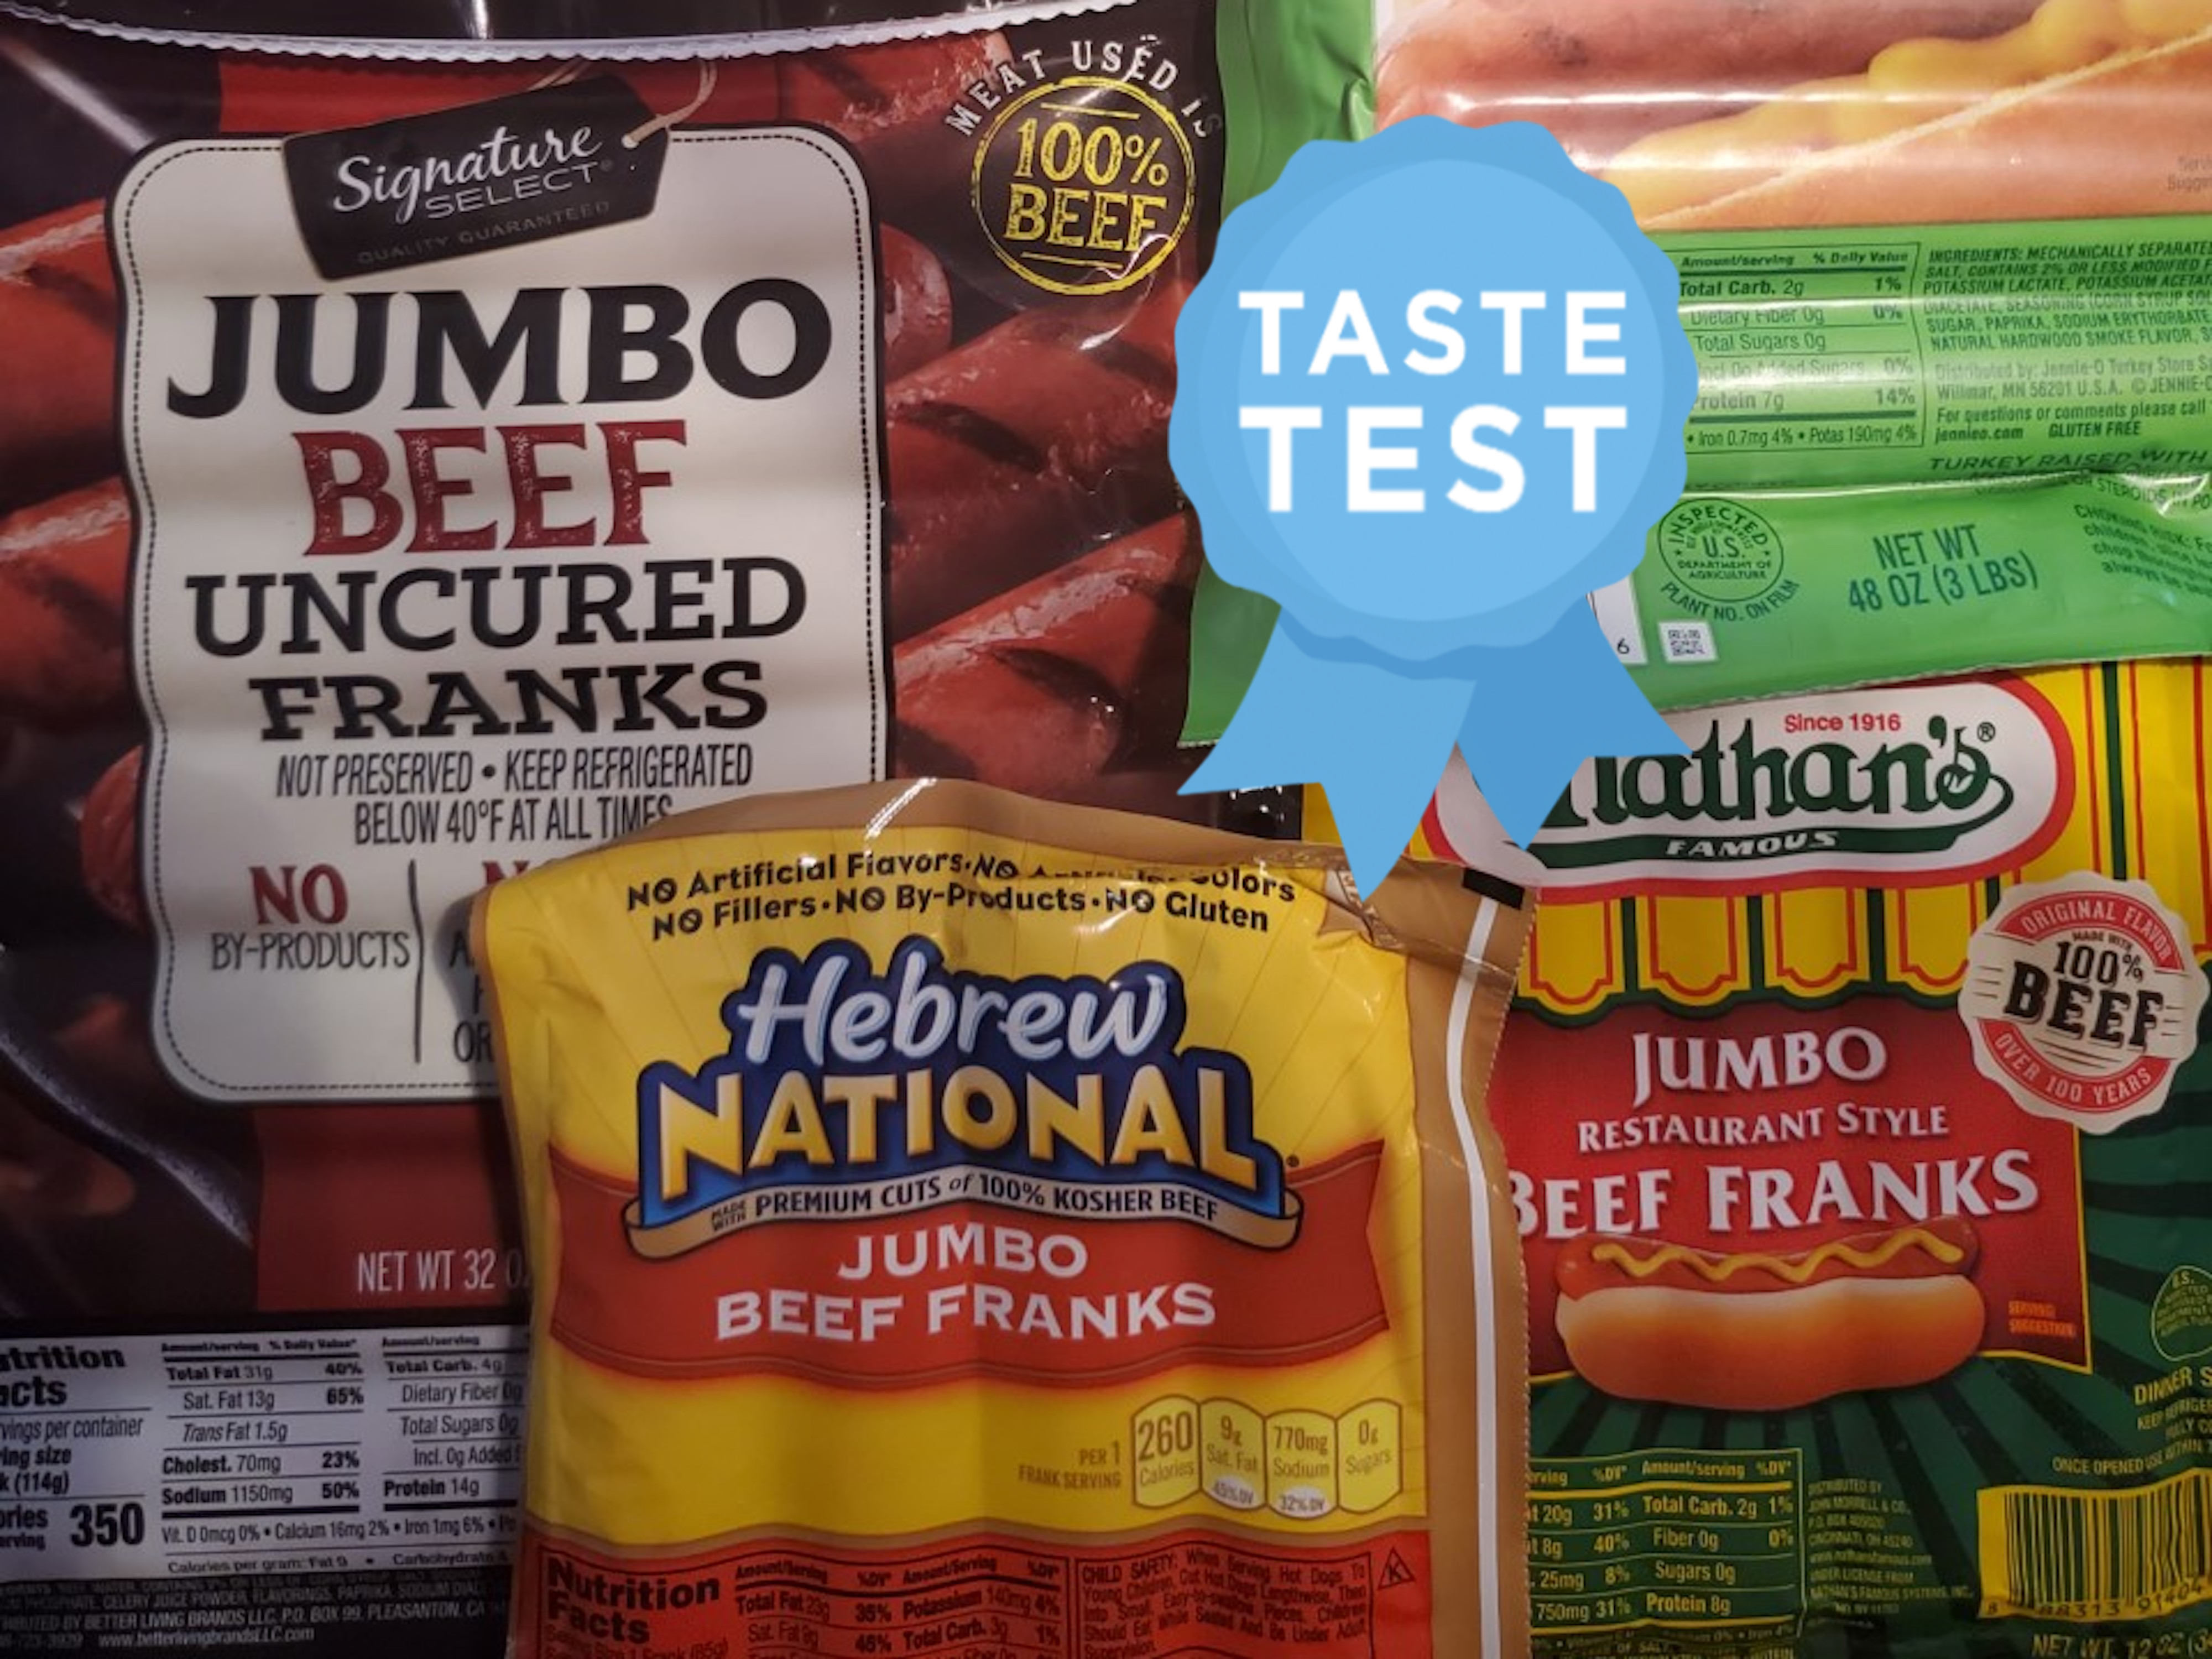 3 Best Turkey Hot Dogs to Buy, According to Our Taste Test